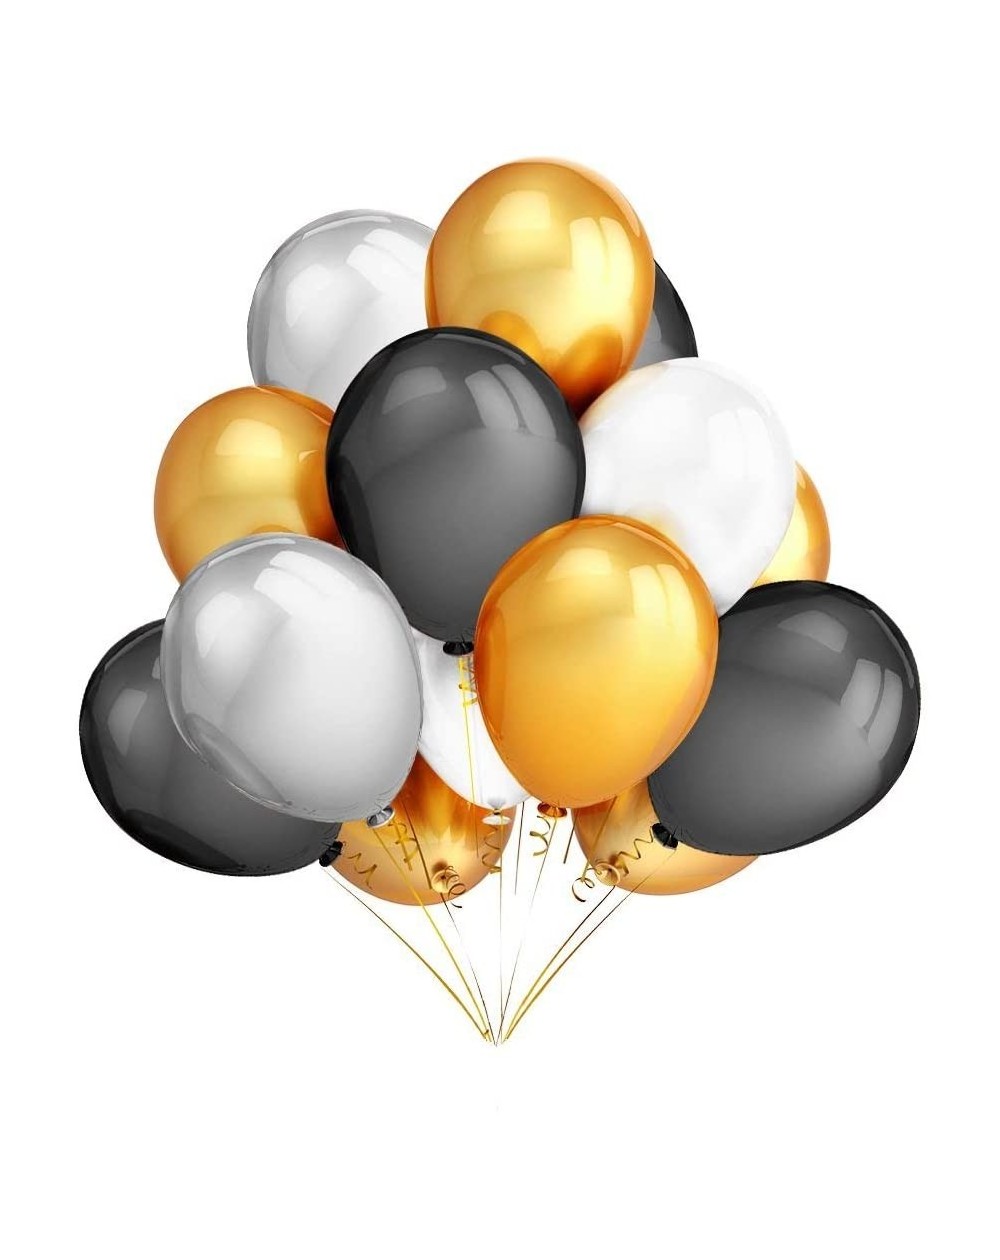 Balloons 12" Gold Black White and Silver Round Latex Balloons for Baby Shower Wedding Birthday Bachelorette Graduation Party ...